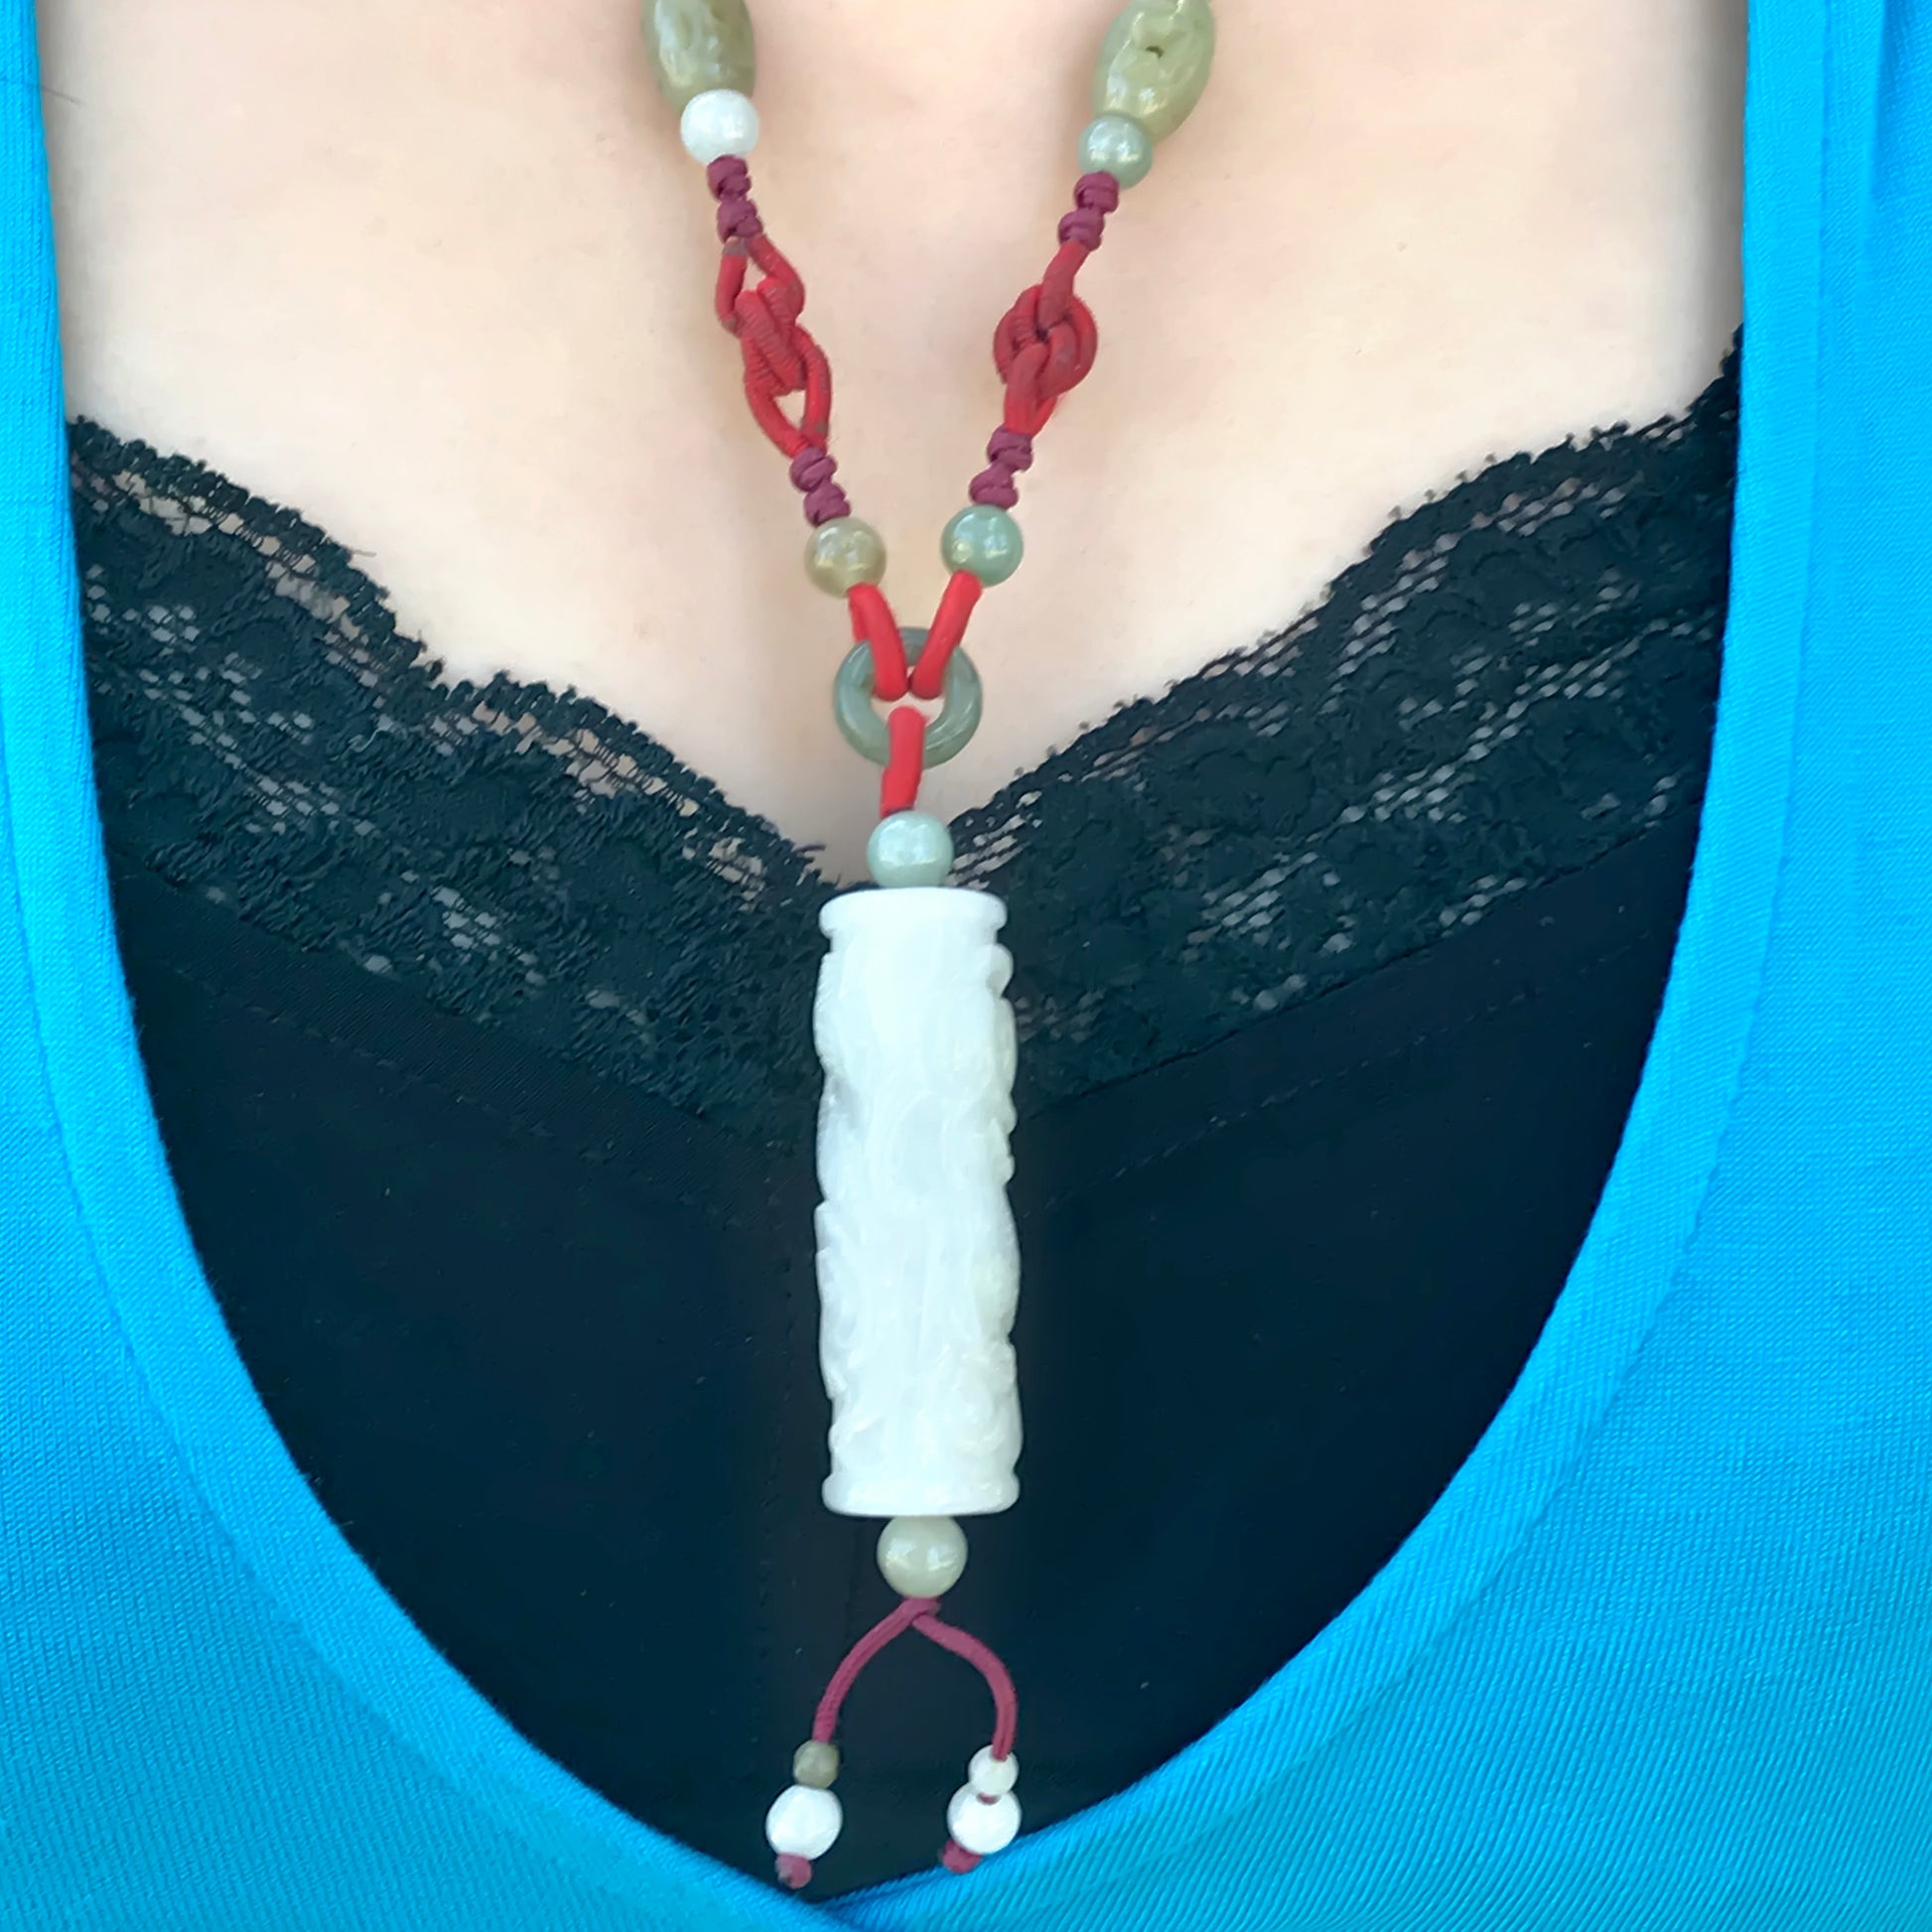 Shine with this Remarkable Masterpiece Dragon Handcrafted Jade Necklace made with Red Cord